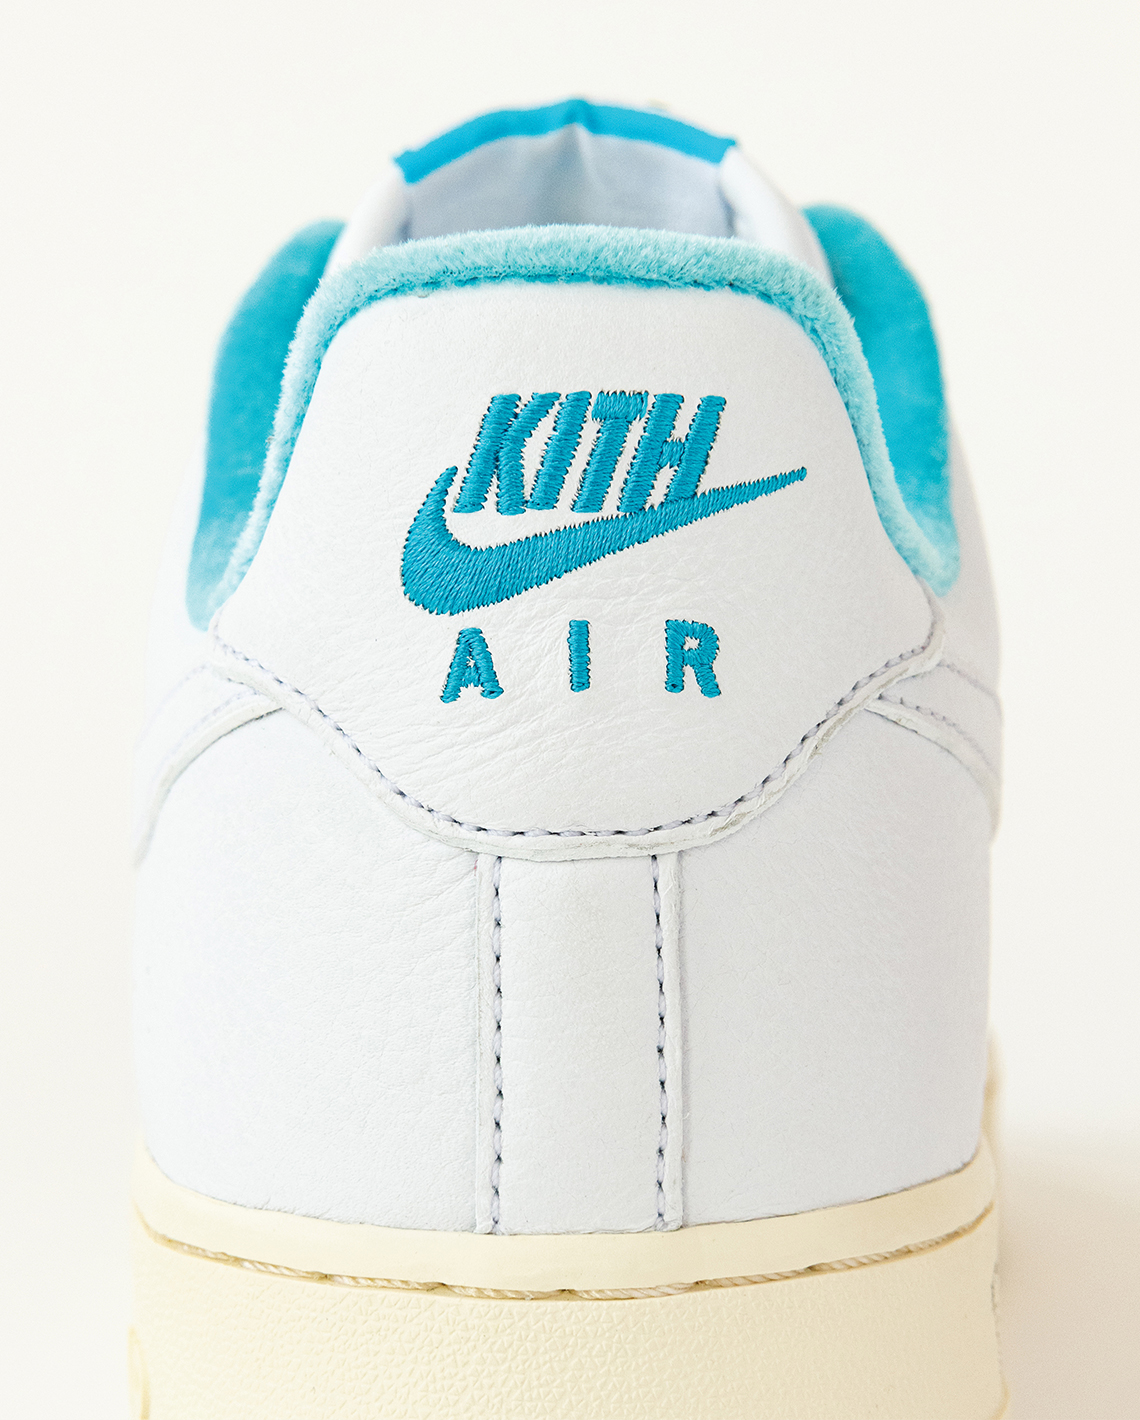 Kith Air Force 1 Hawaii Release Date 3